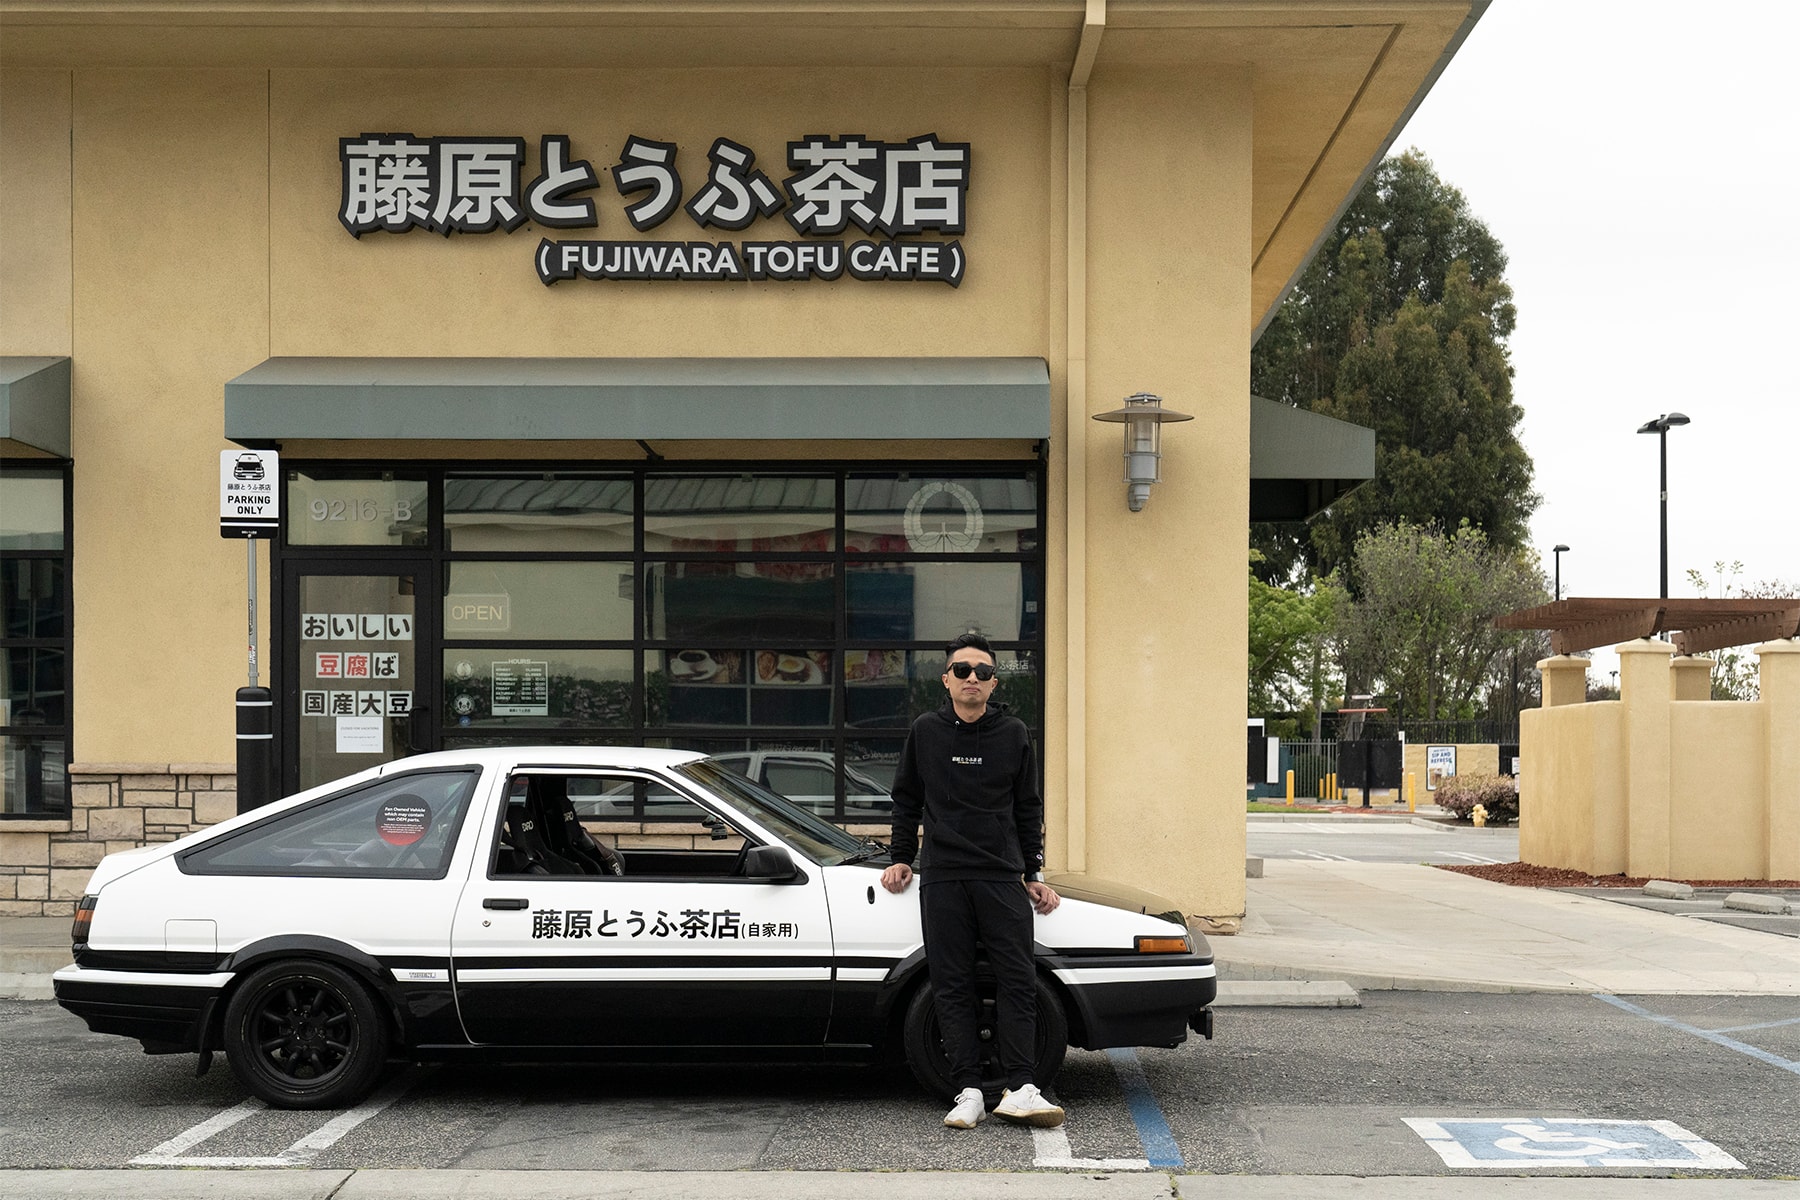 Initial D World - Central Anime has just released all four